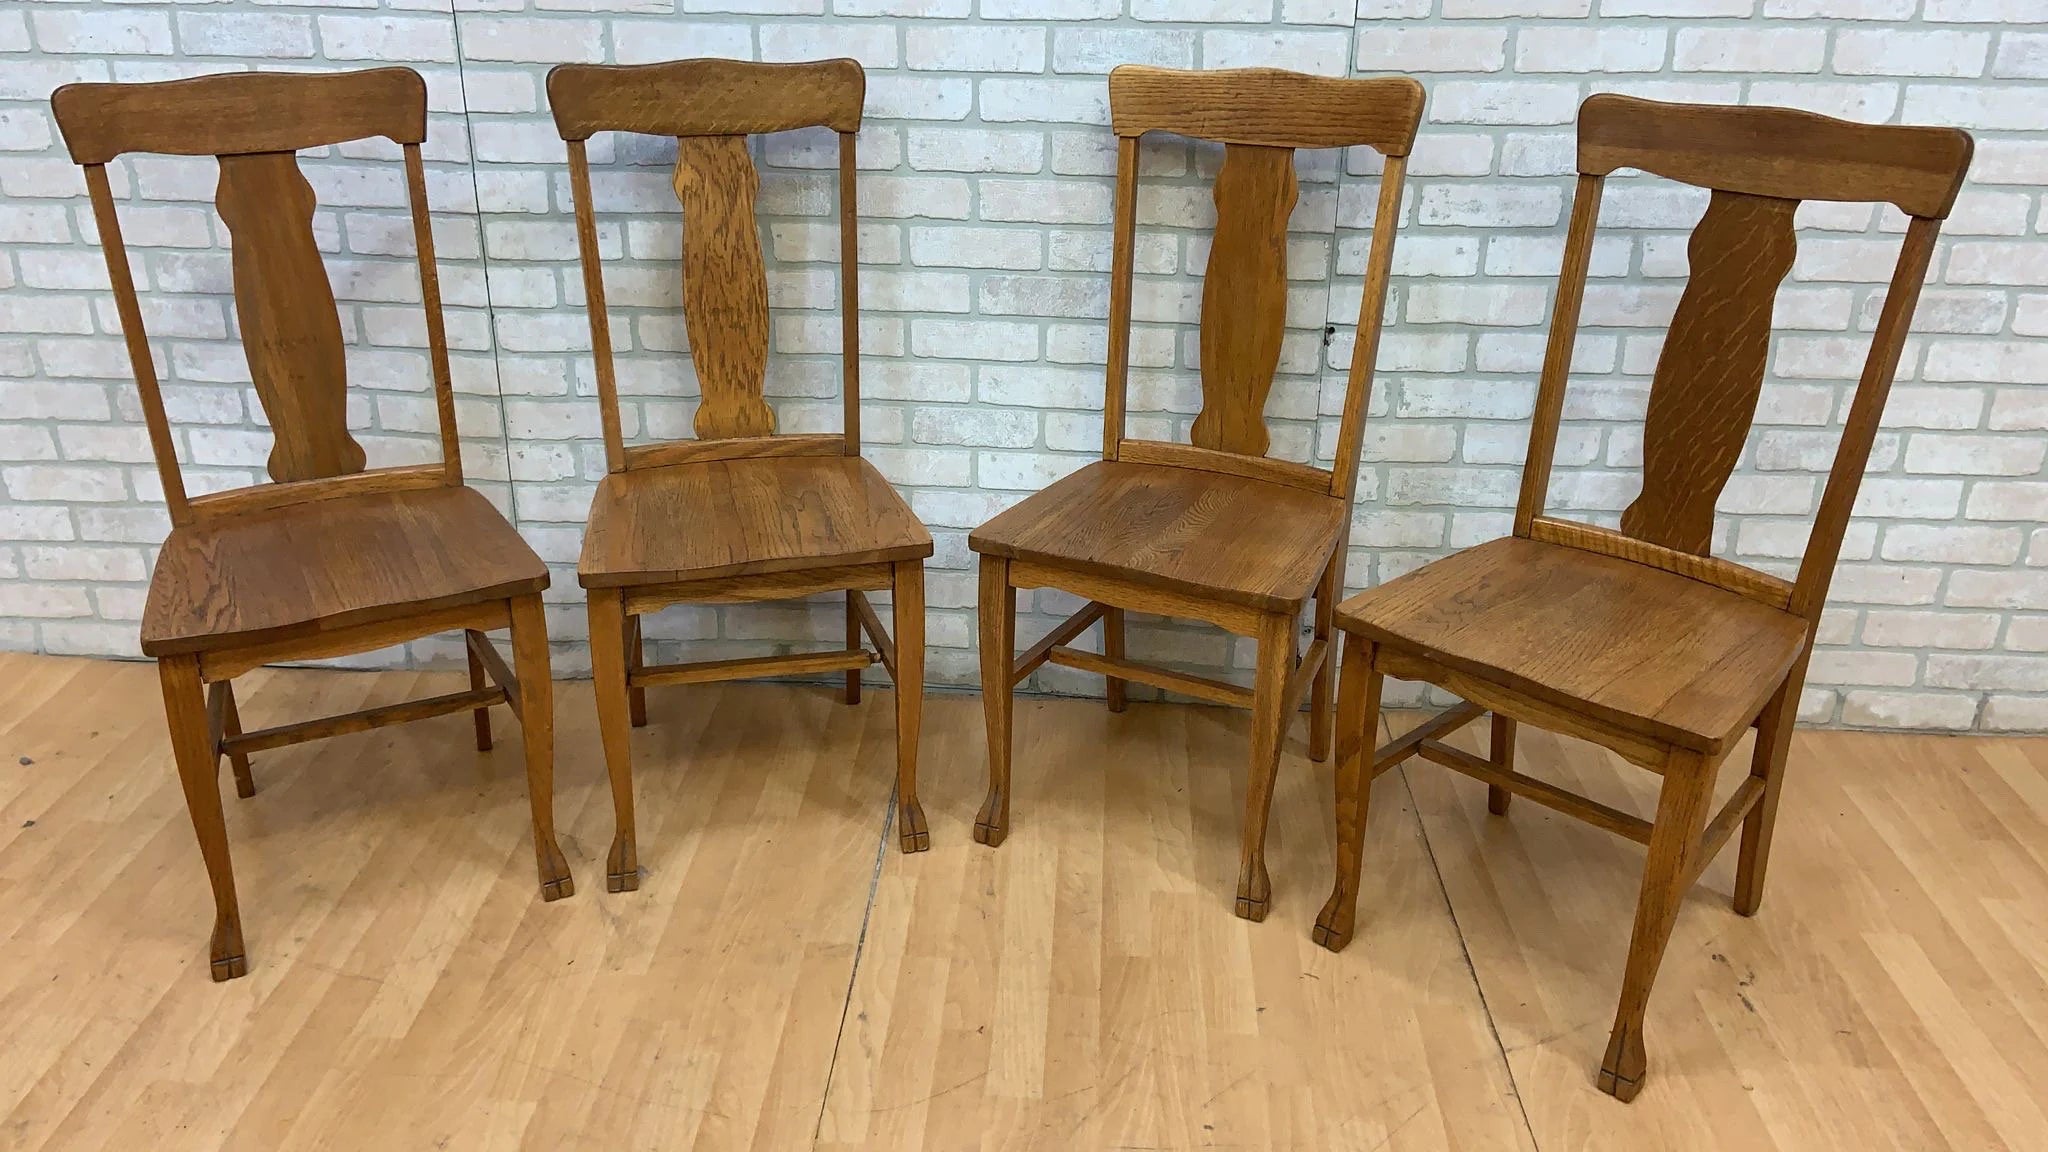 Antique Quarter Sawn Oak Carved Claw Foot Extention Dining/Game Table with 4 Chairs and 2 Leaves - 7 Item Set